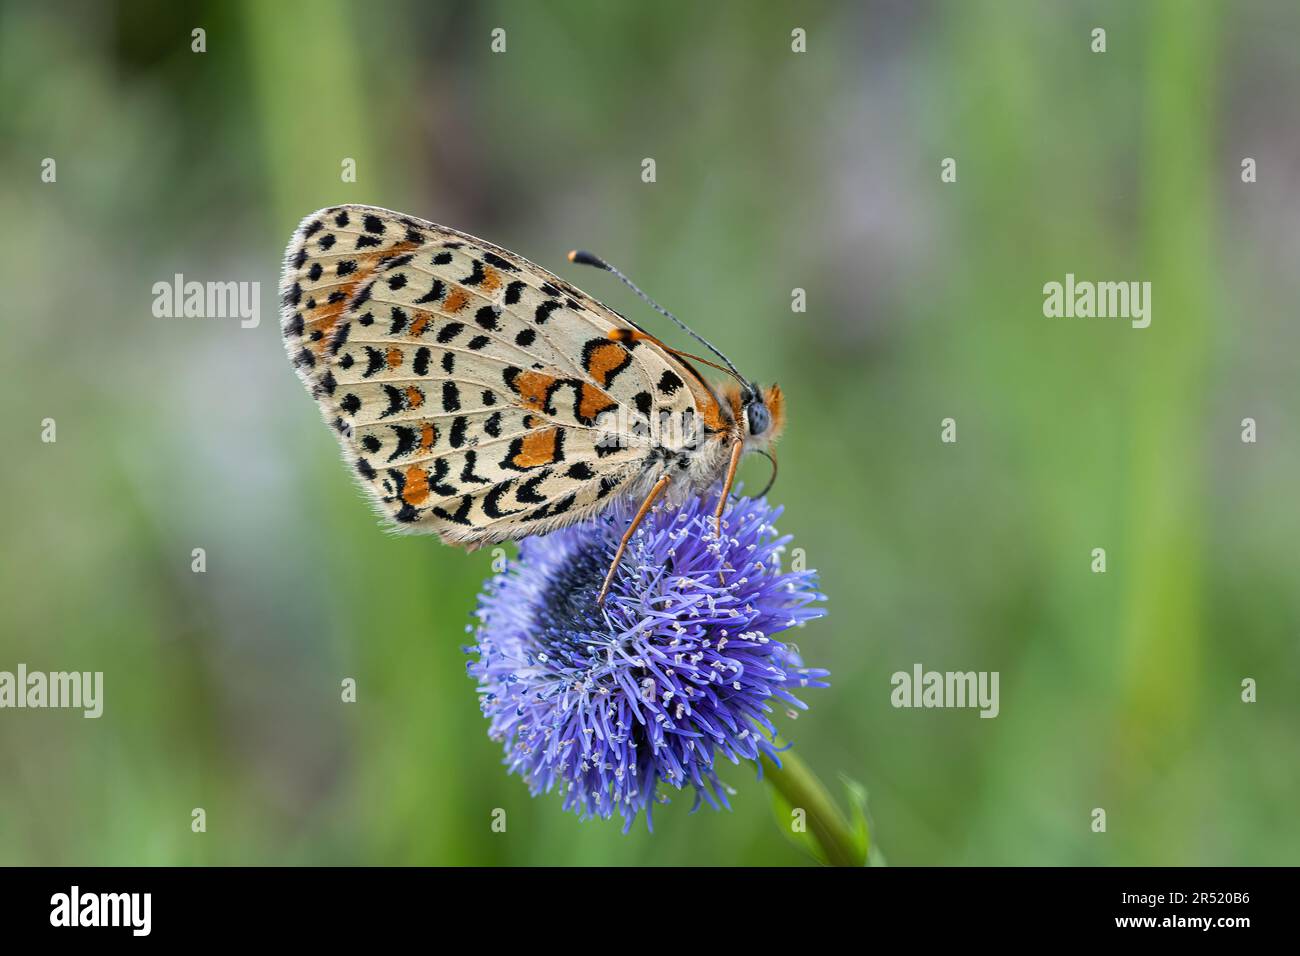 Spotted fritillary butterfly (Melitaea didyma) resting on common globularia (Globularia vulgaris) wildflower in Umbria, Italy, Europe, during May Stock Photo